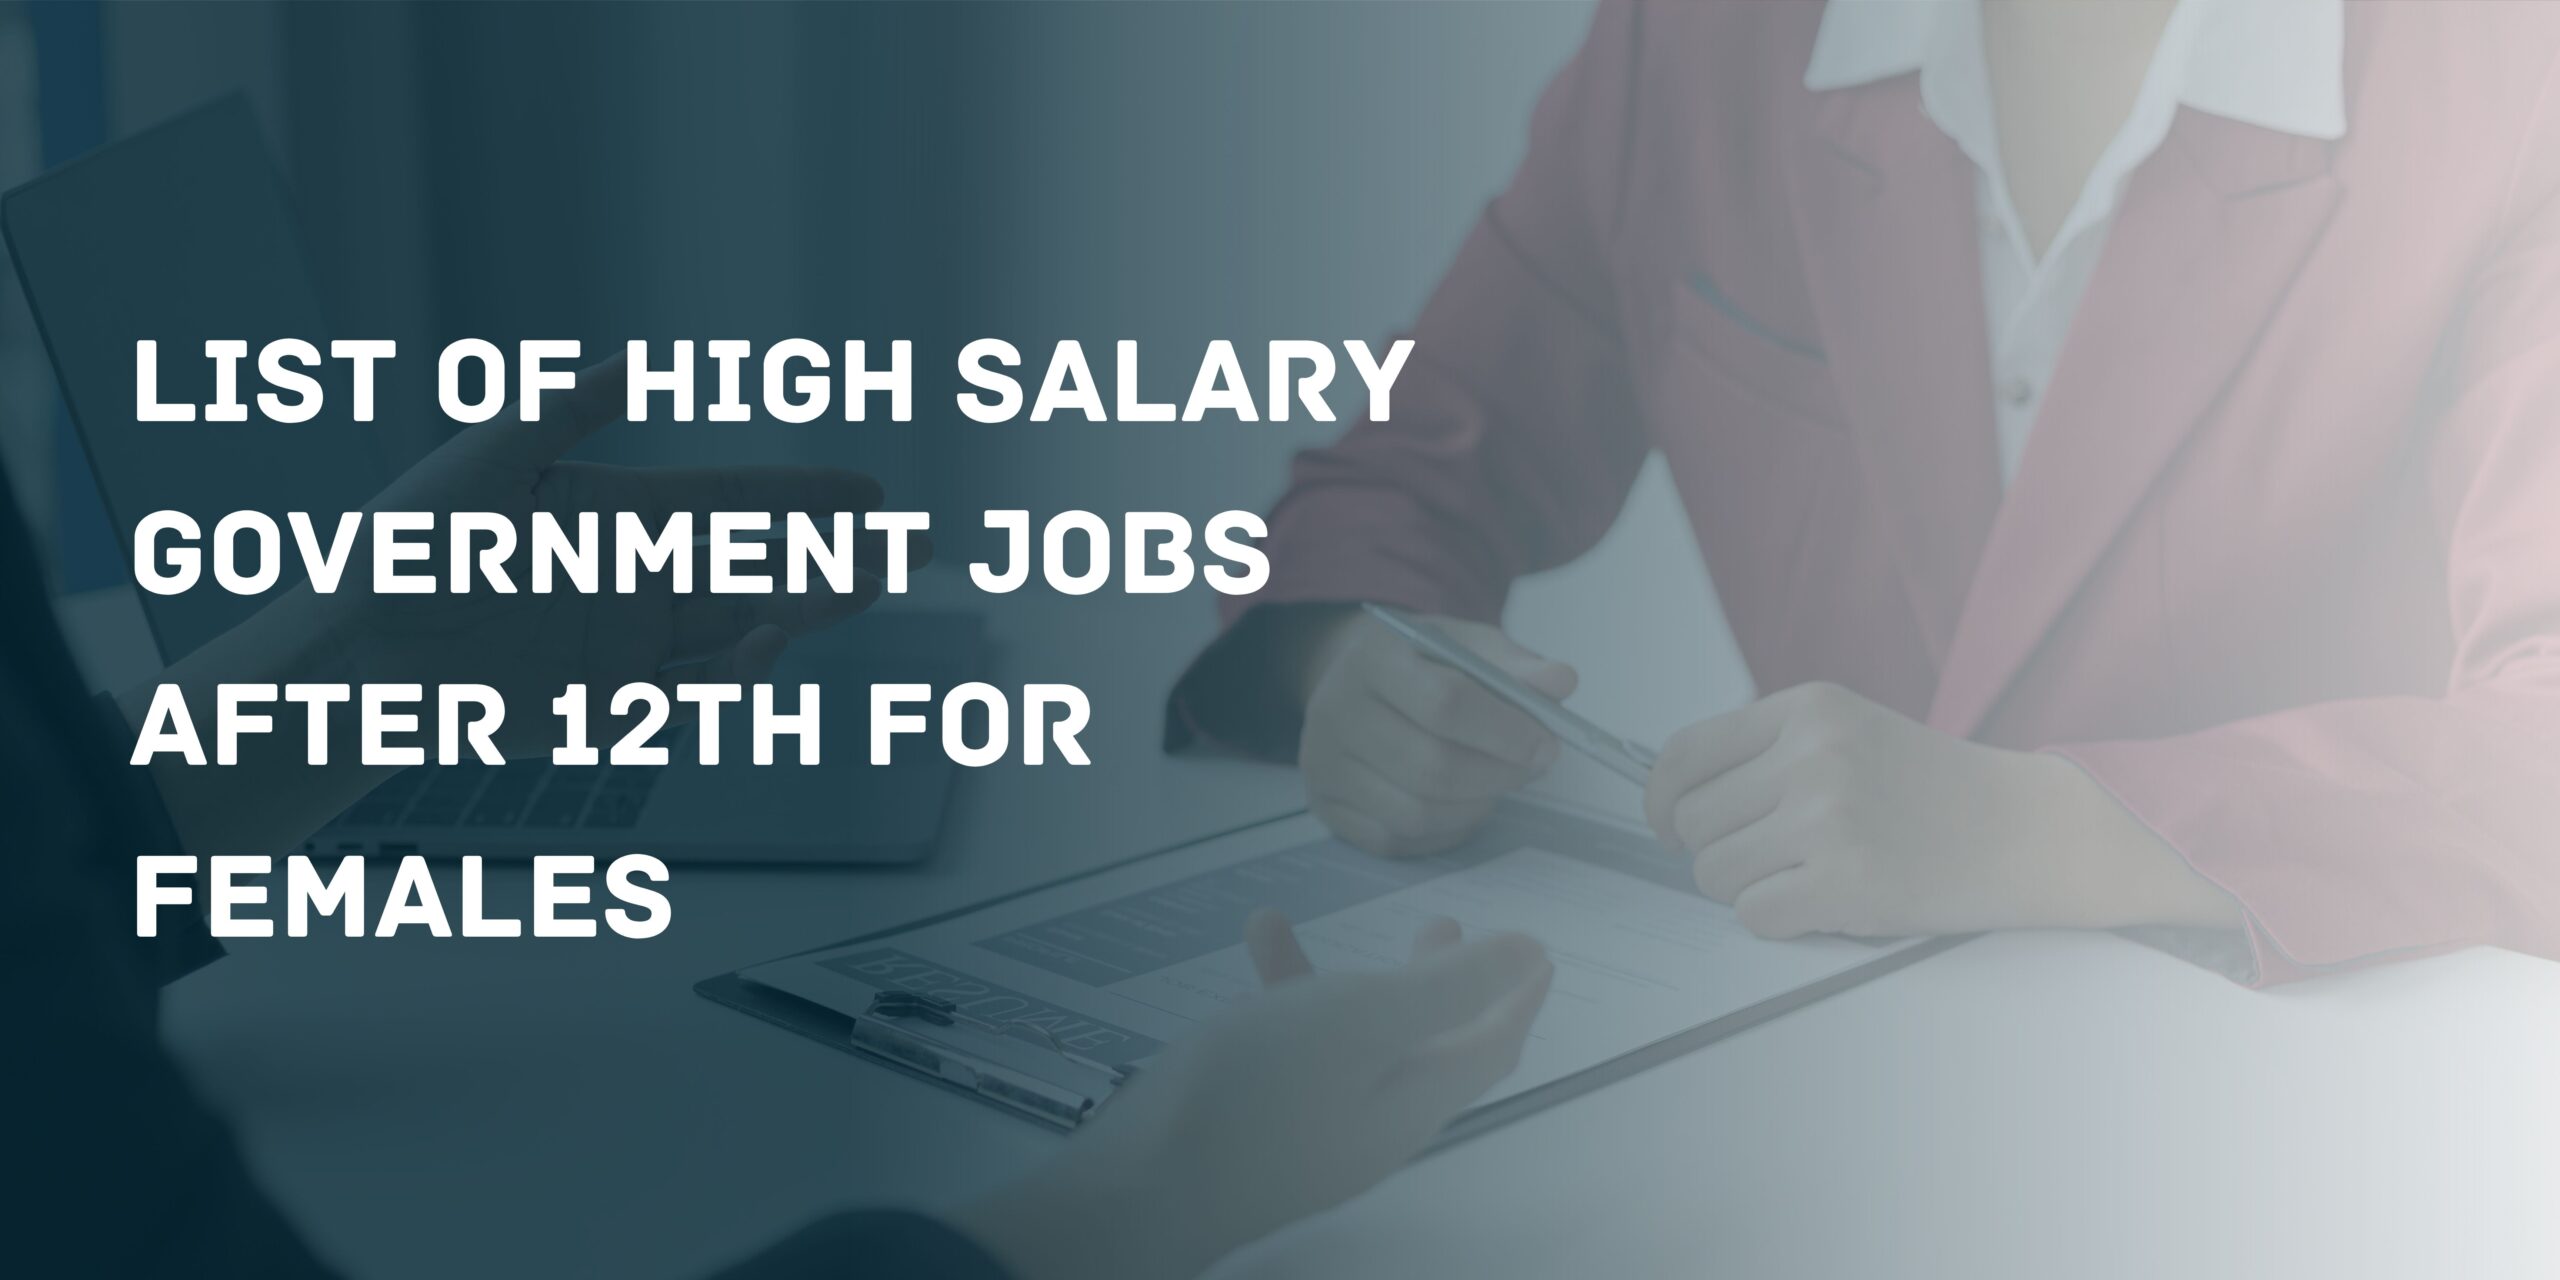 List of high salary government jobs after 12th for females